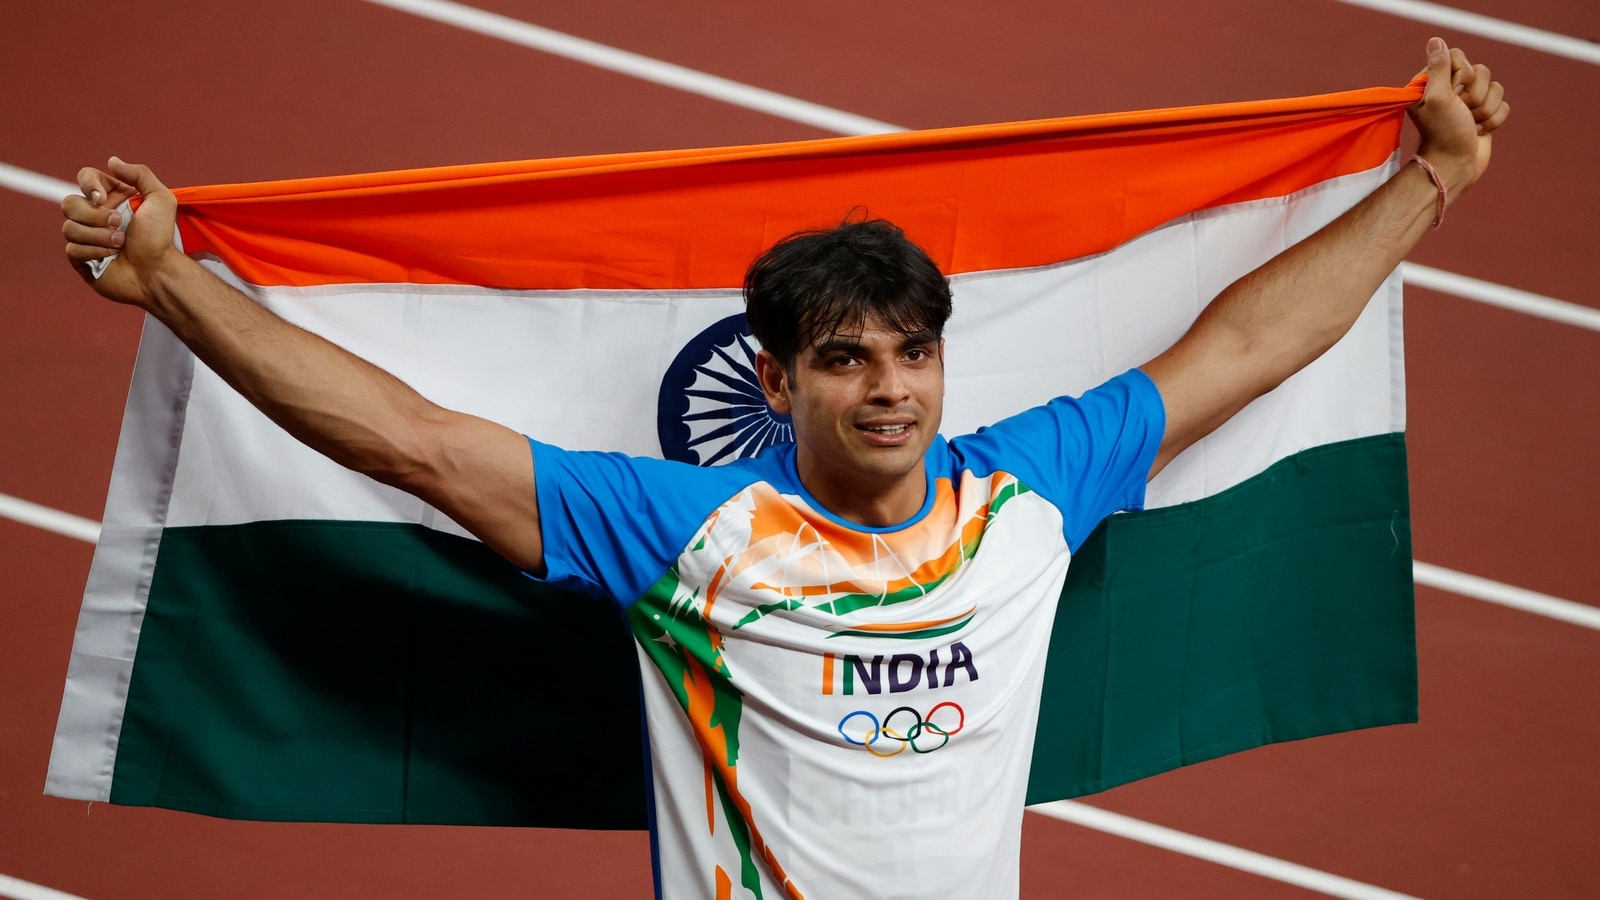 Neeraj Chopra to get ₹6 crore cash reward, to be made head of Centre for Excellence in Athletics: Khattar | Olympics - News Chant